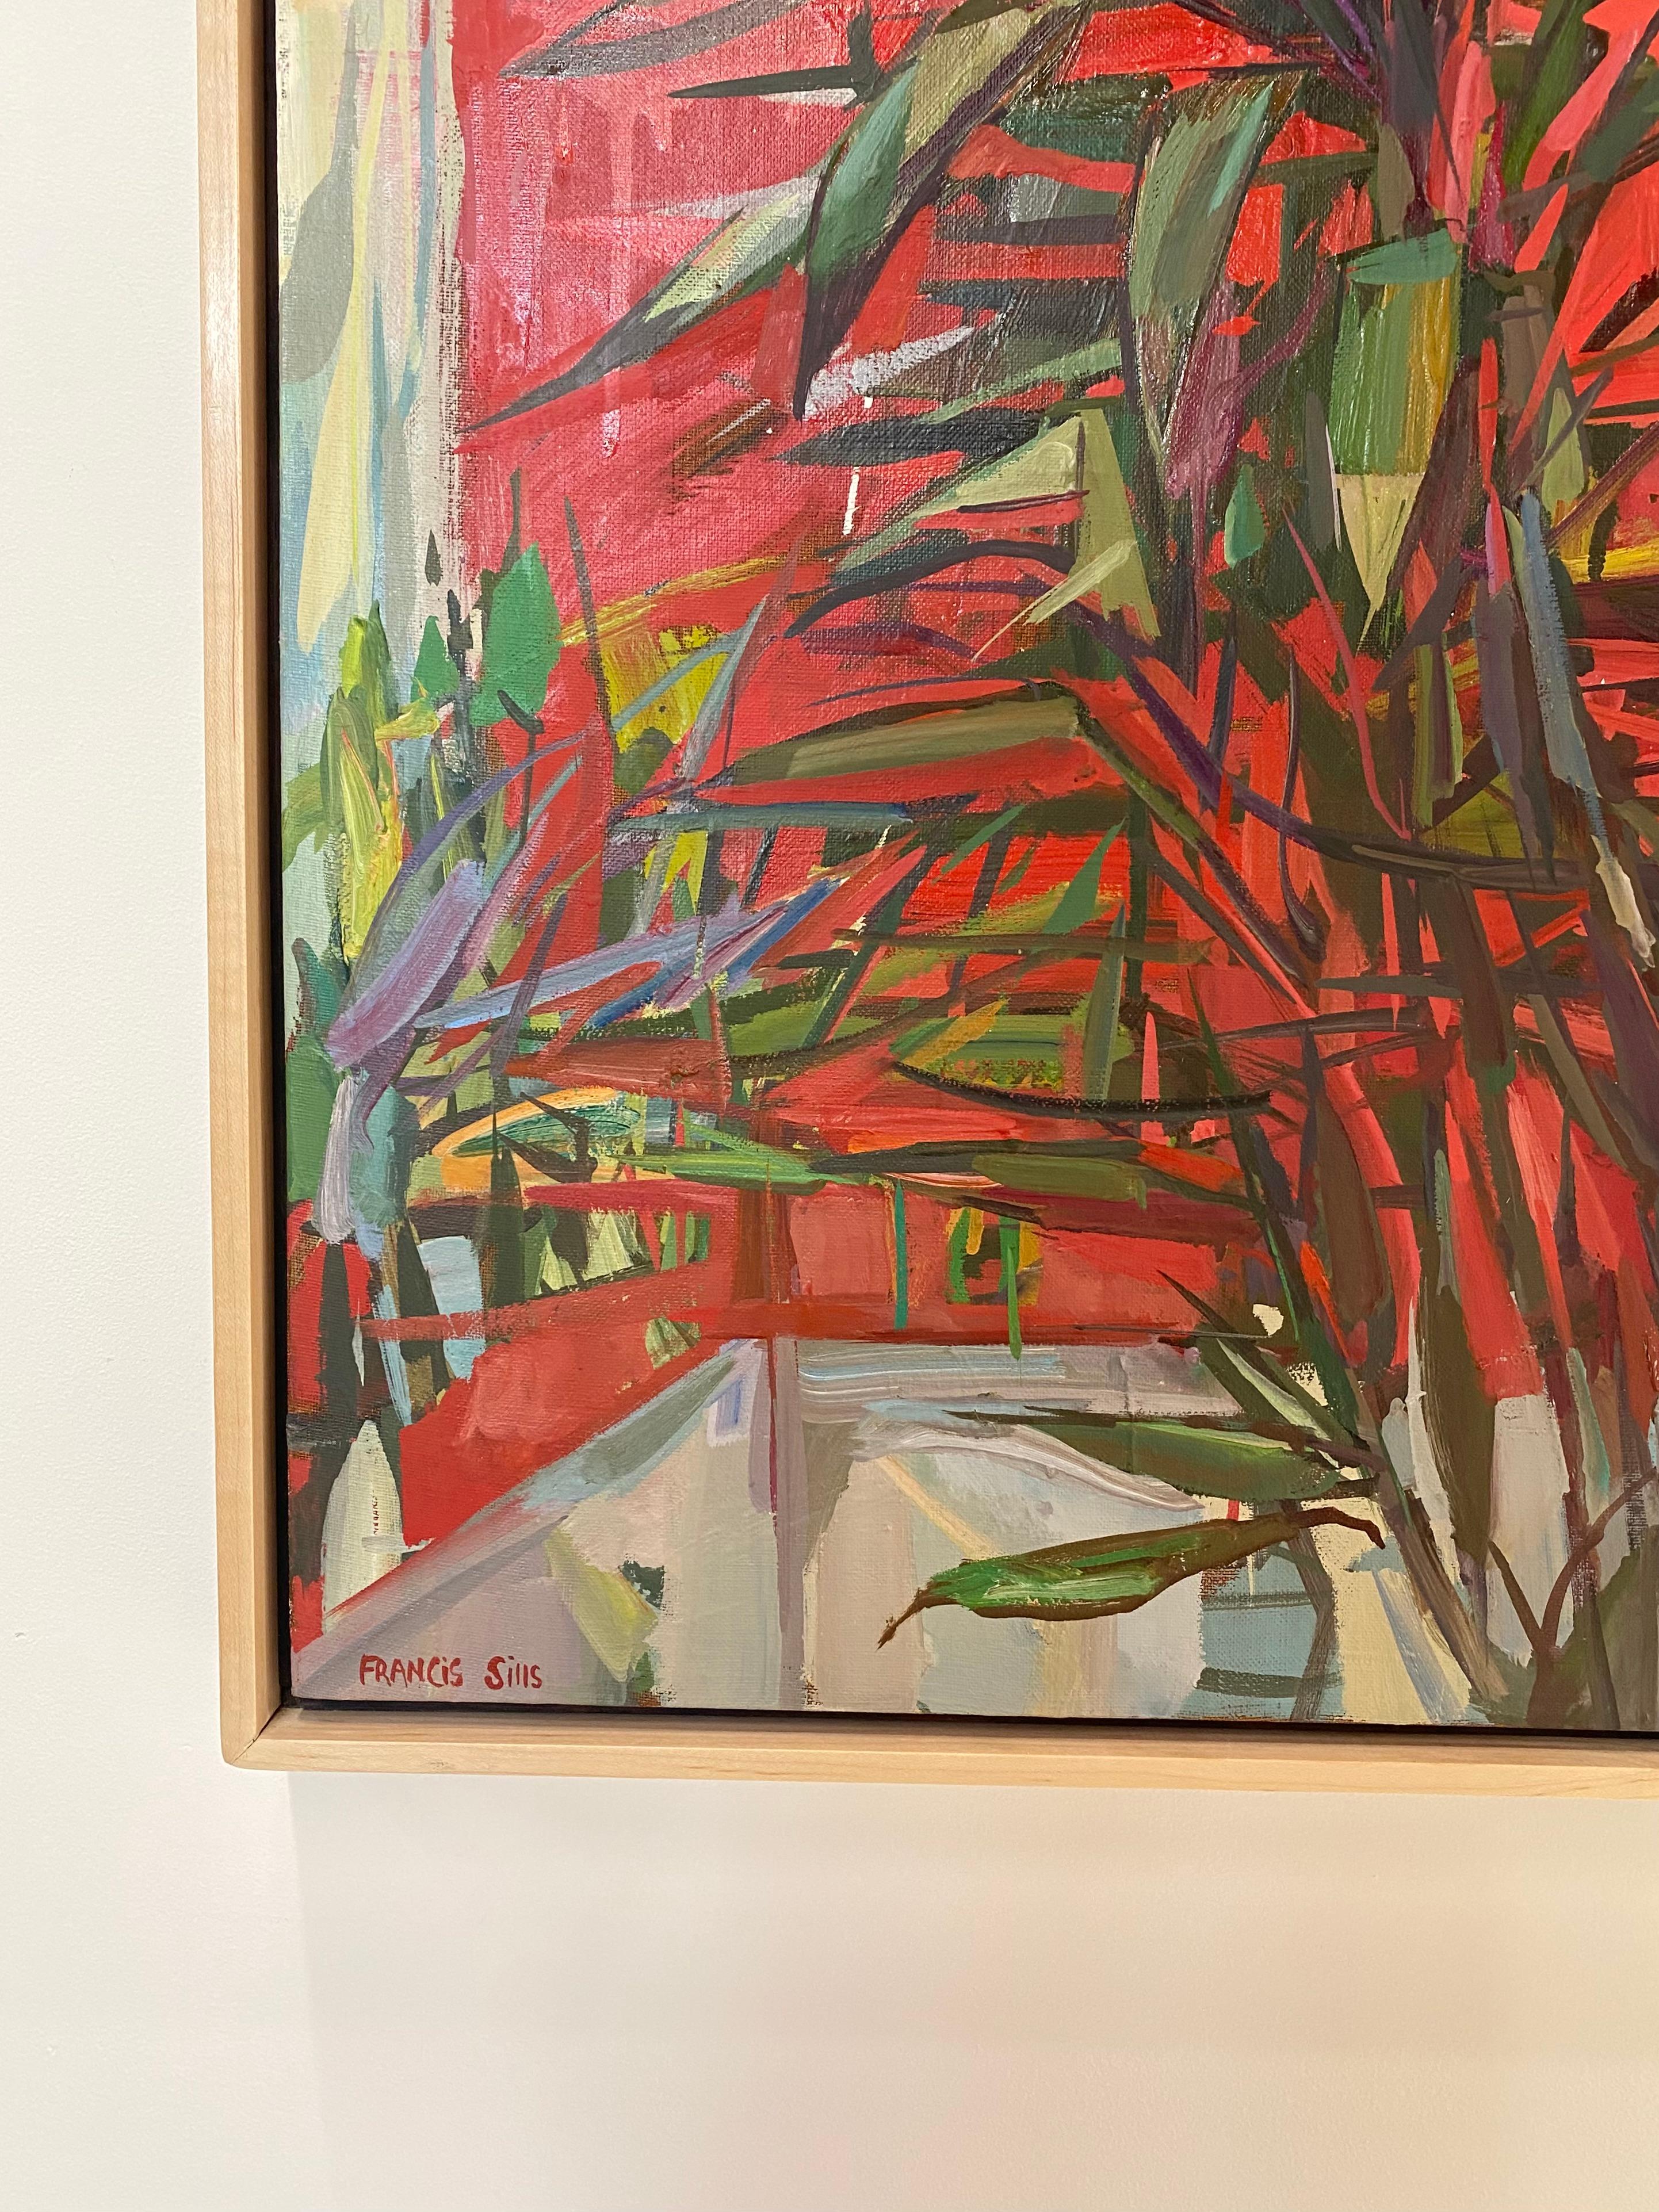 The verdant shades of green leaves are lush against the dramatic, brilliant crimson red background in this painting of tropical yucca plants in planters. Signed on recto, signed, dated and titled on verso. Framed in thin, light natural wood float